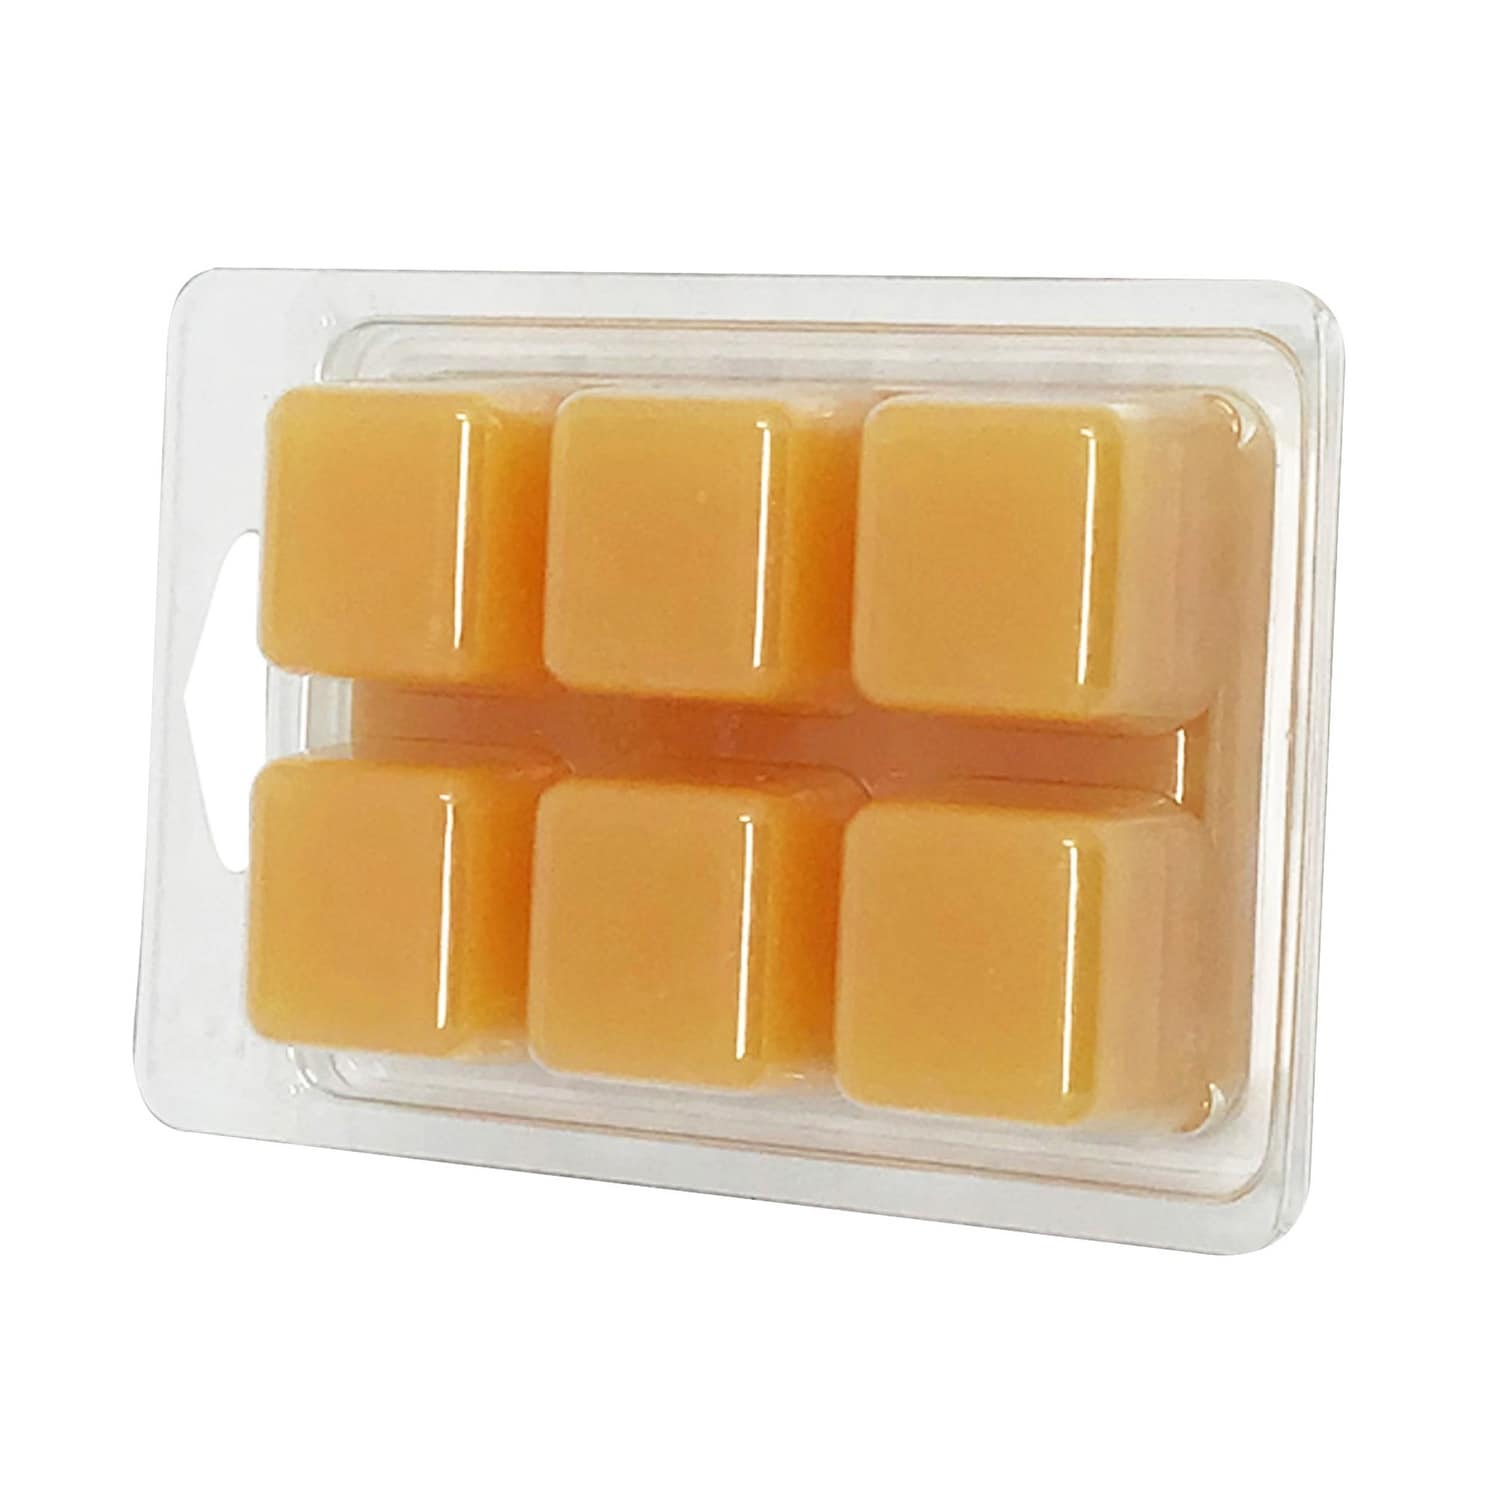 Marshmallow Crispies Scented Wax Melts, ScentSationals, 2.5 oz (1